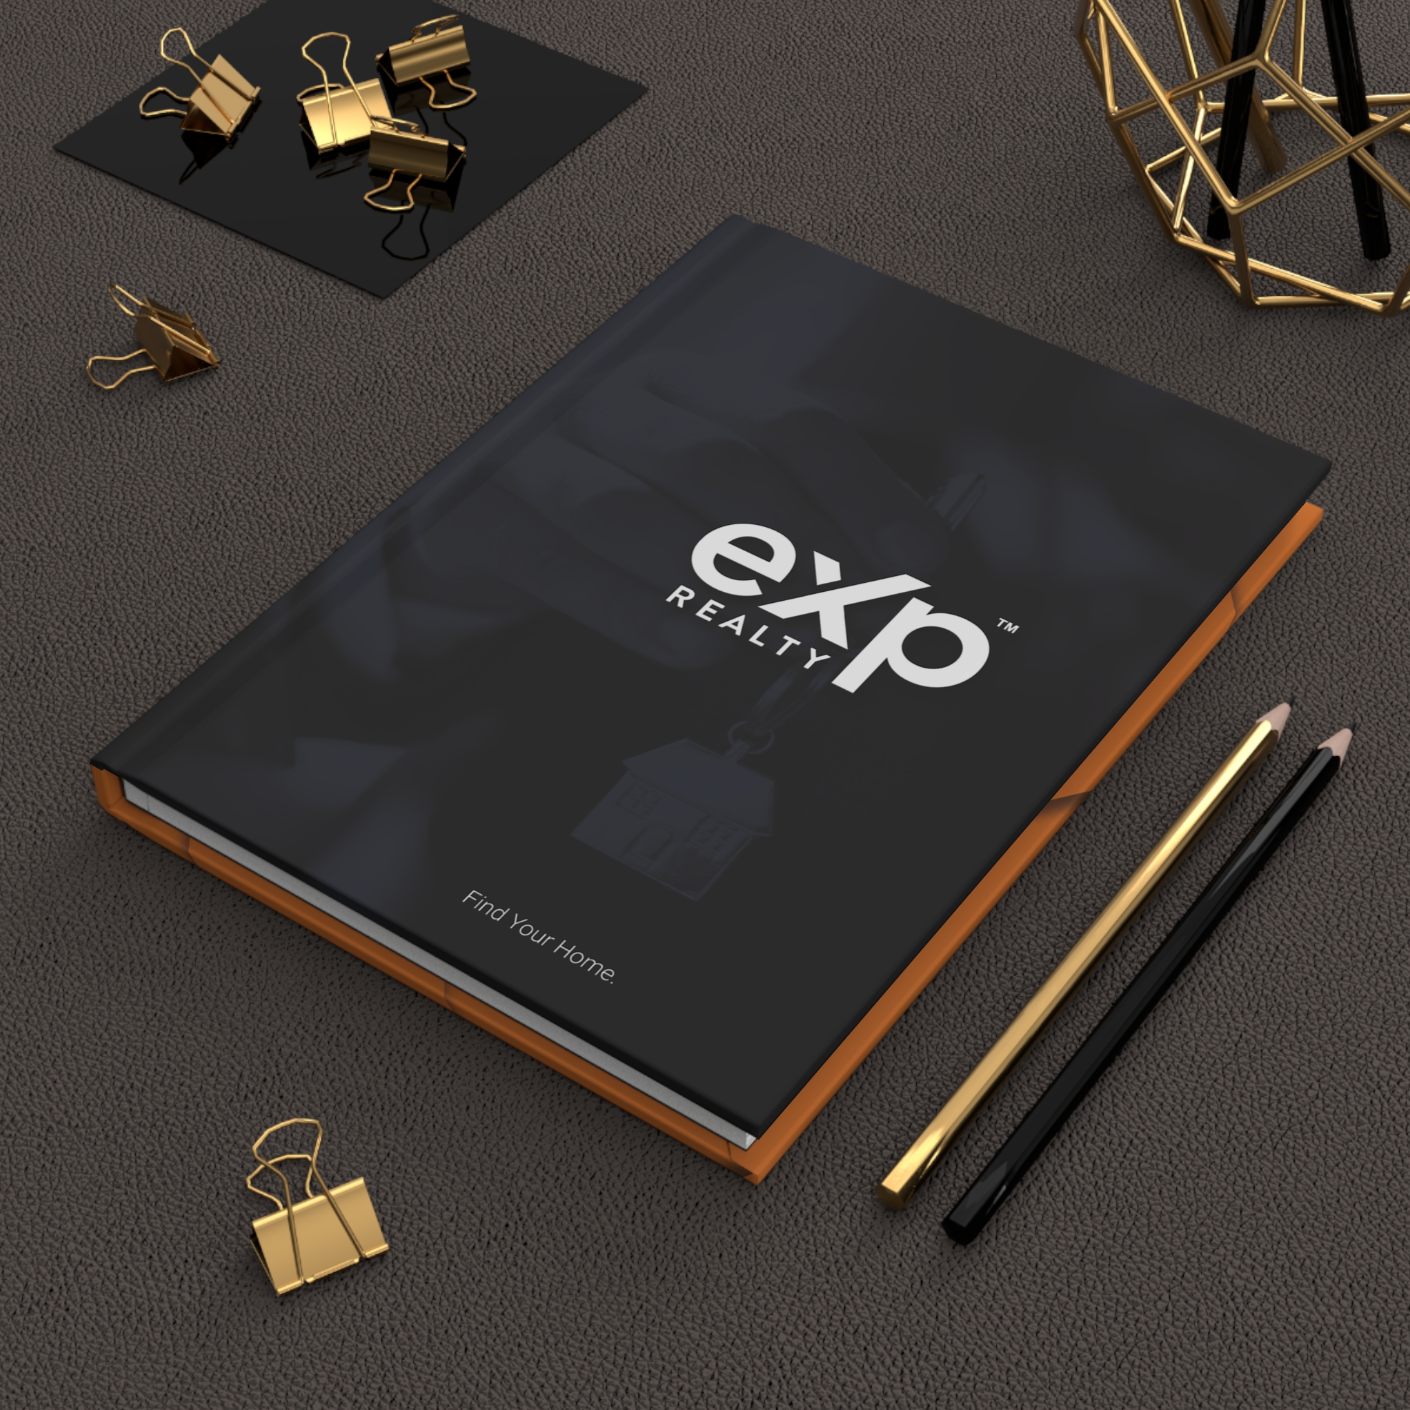 eXp Full Color Hardcover Binders Opaque and Orange (from as low as $10.46 per cover)